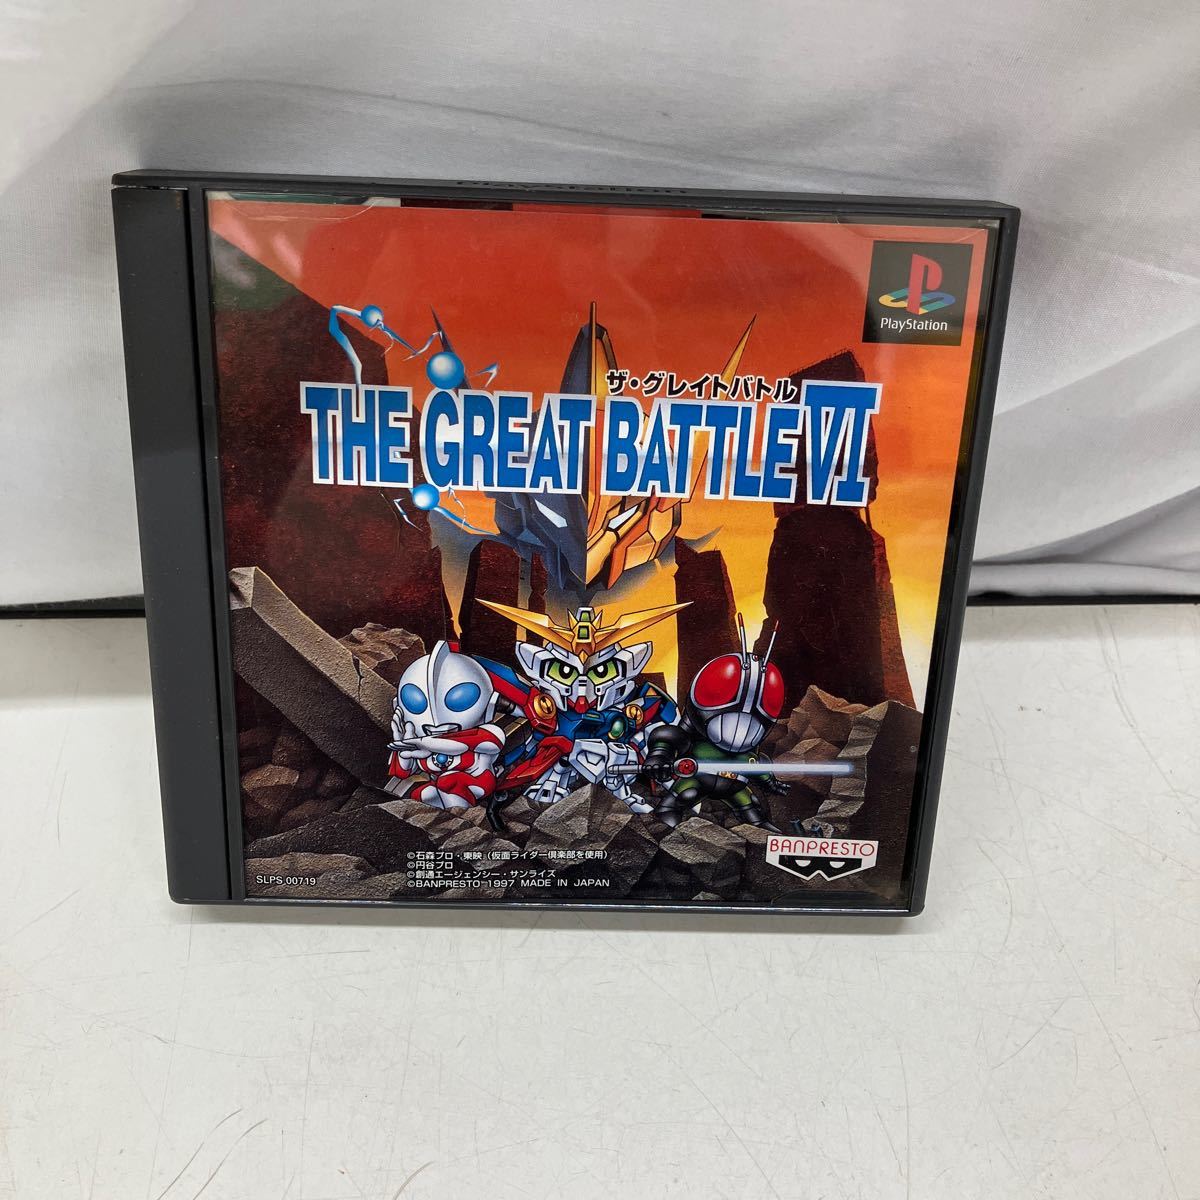 64①*60216-⑤ PlayStation PlayStation PS soft The * решетка Battle Ⅵ THE GREAT BATTLE Ⅵ утиль 